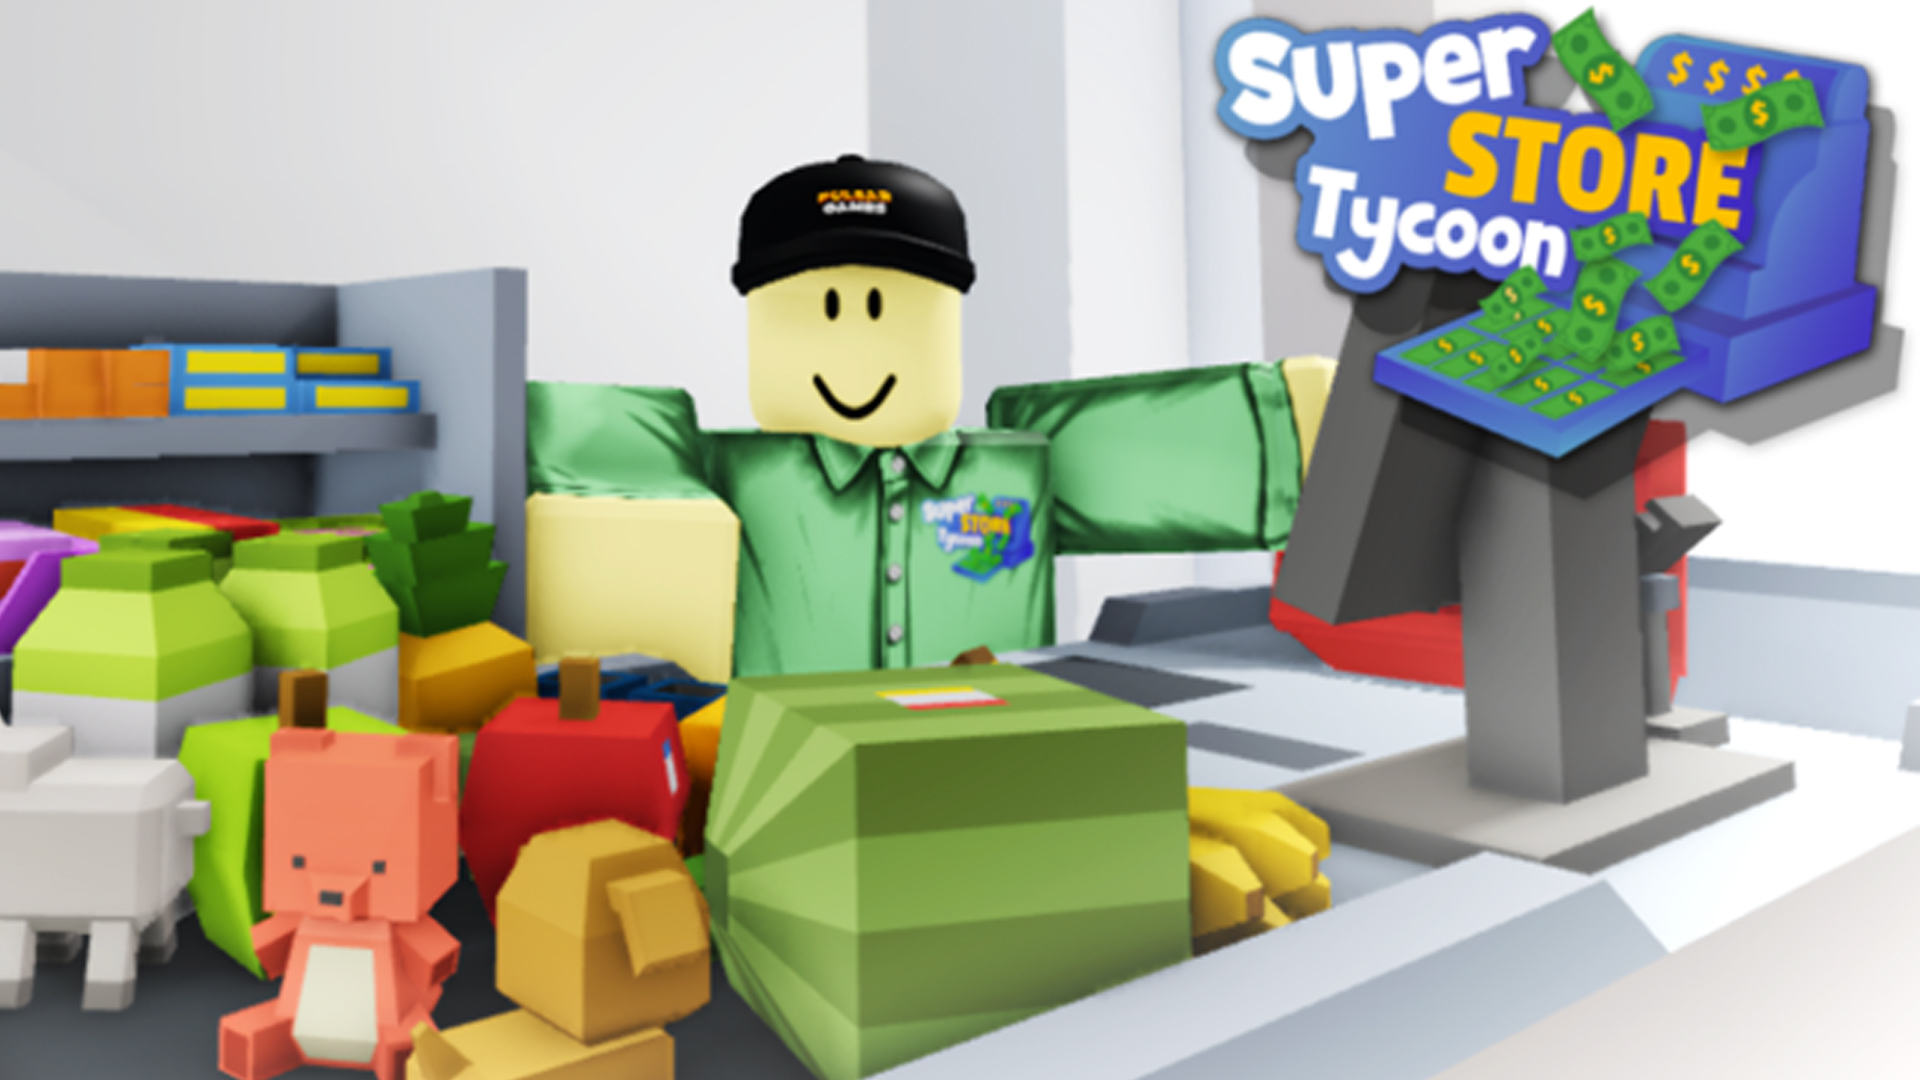 Game Store Tycoon codes – get some cash